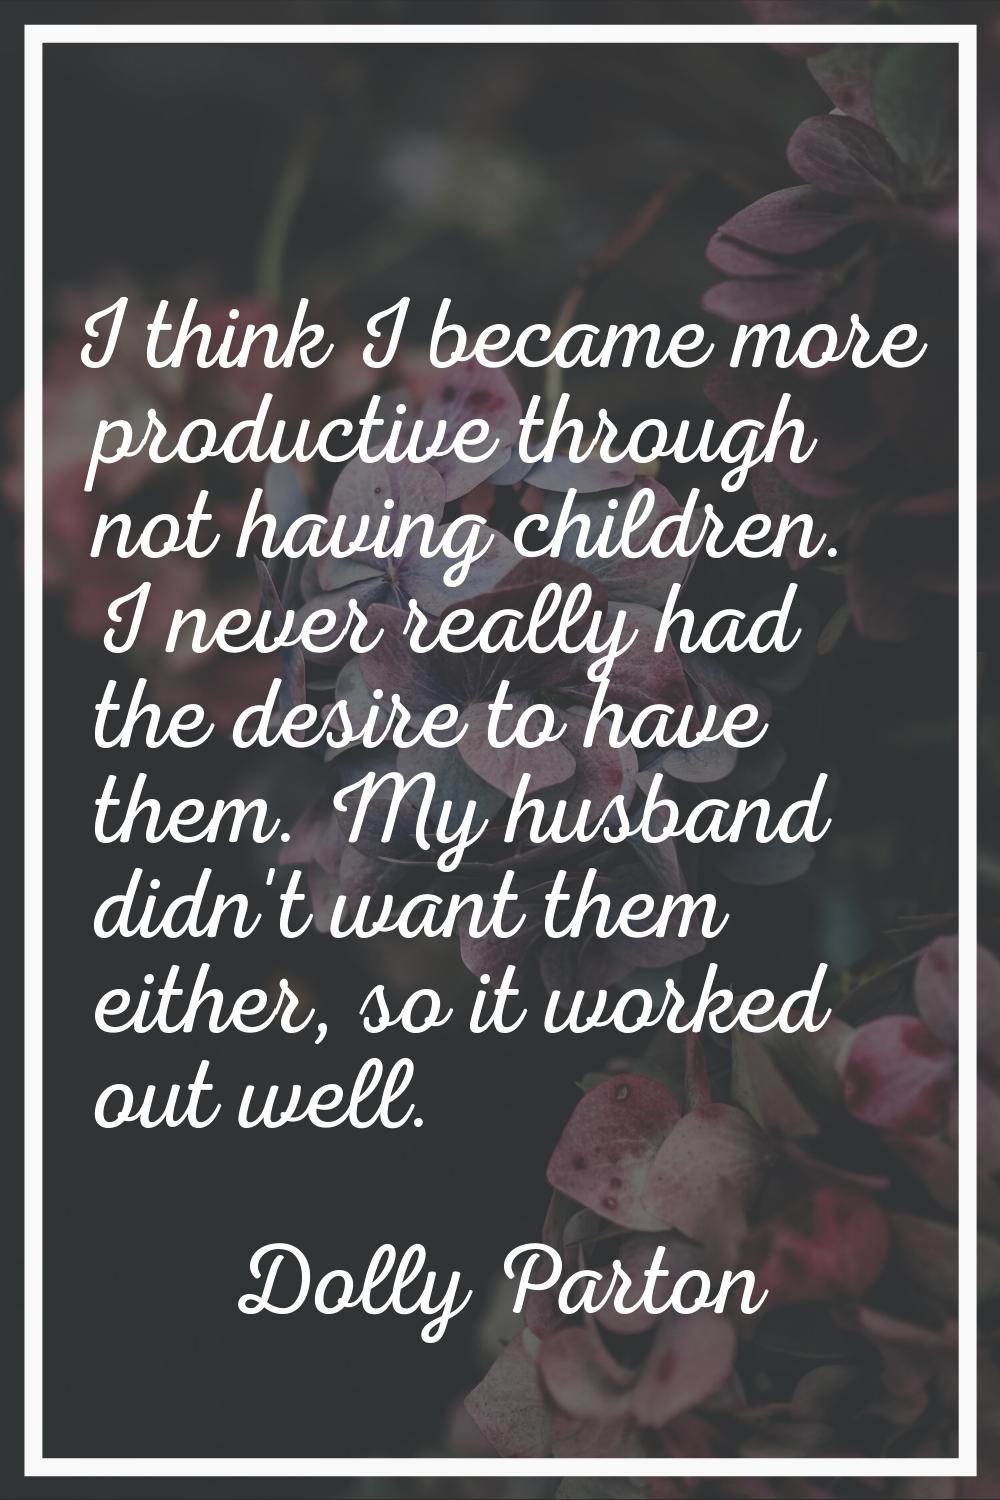 I think I became more productive through not having children. I never really had the desire to have